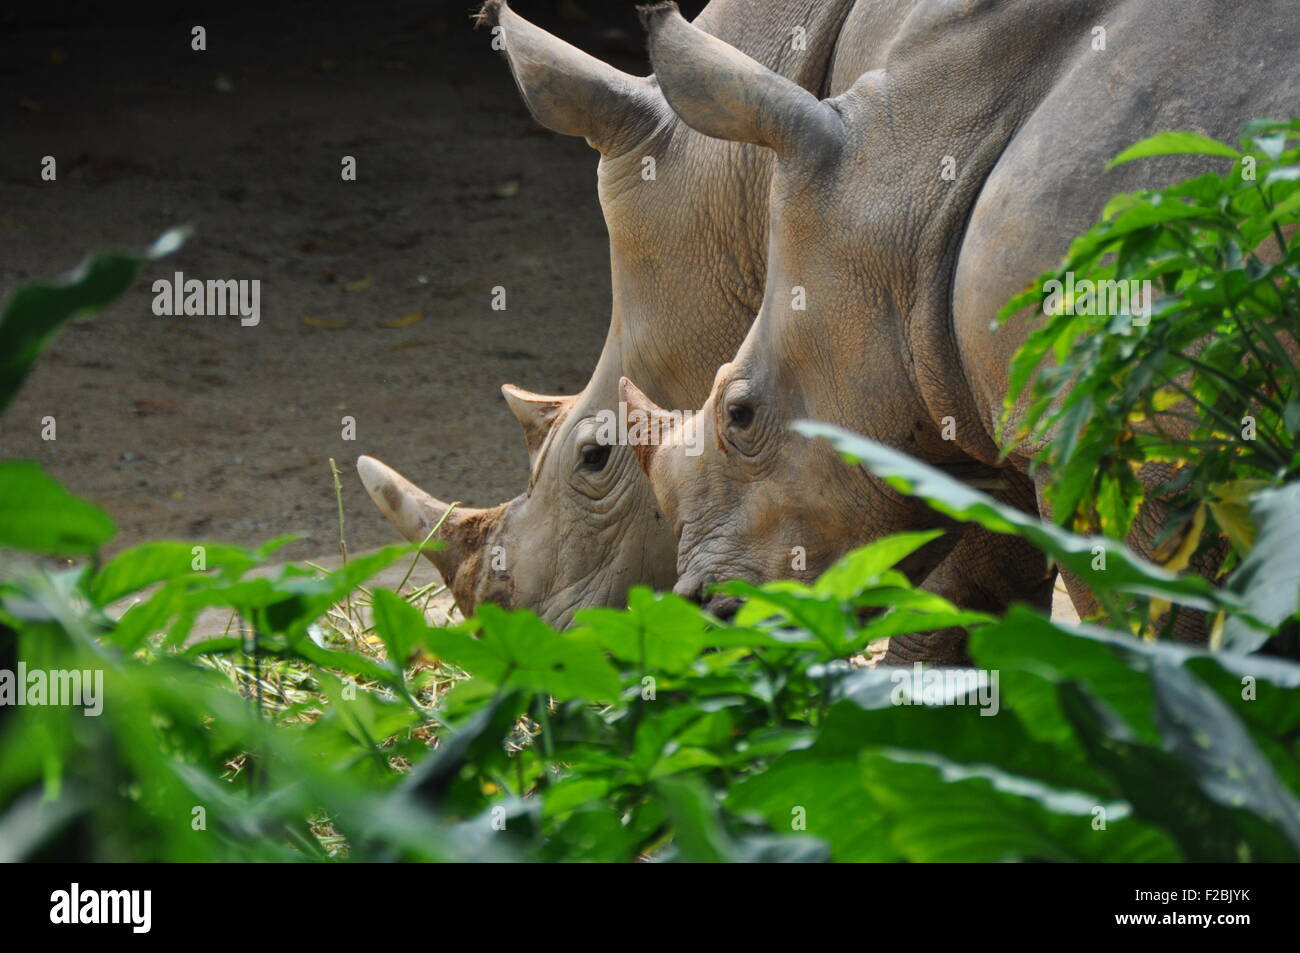 Two rhinos eating together. Stock Photo